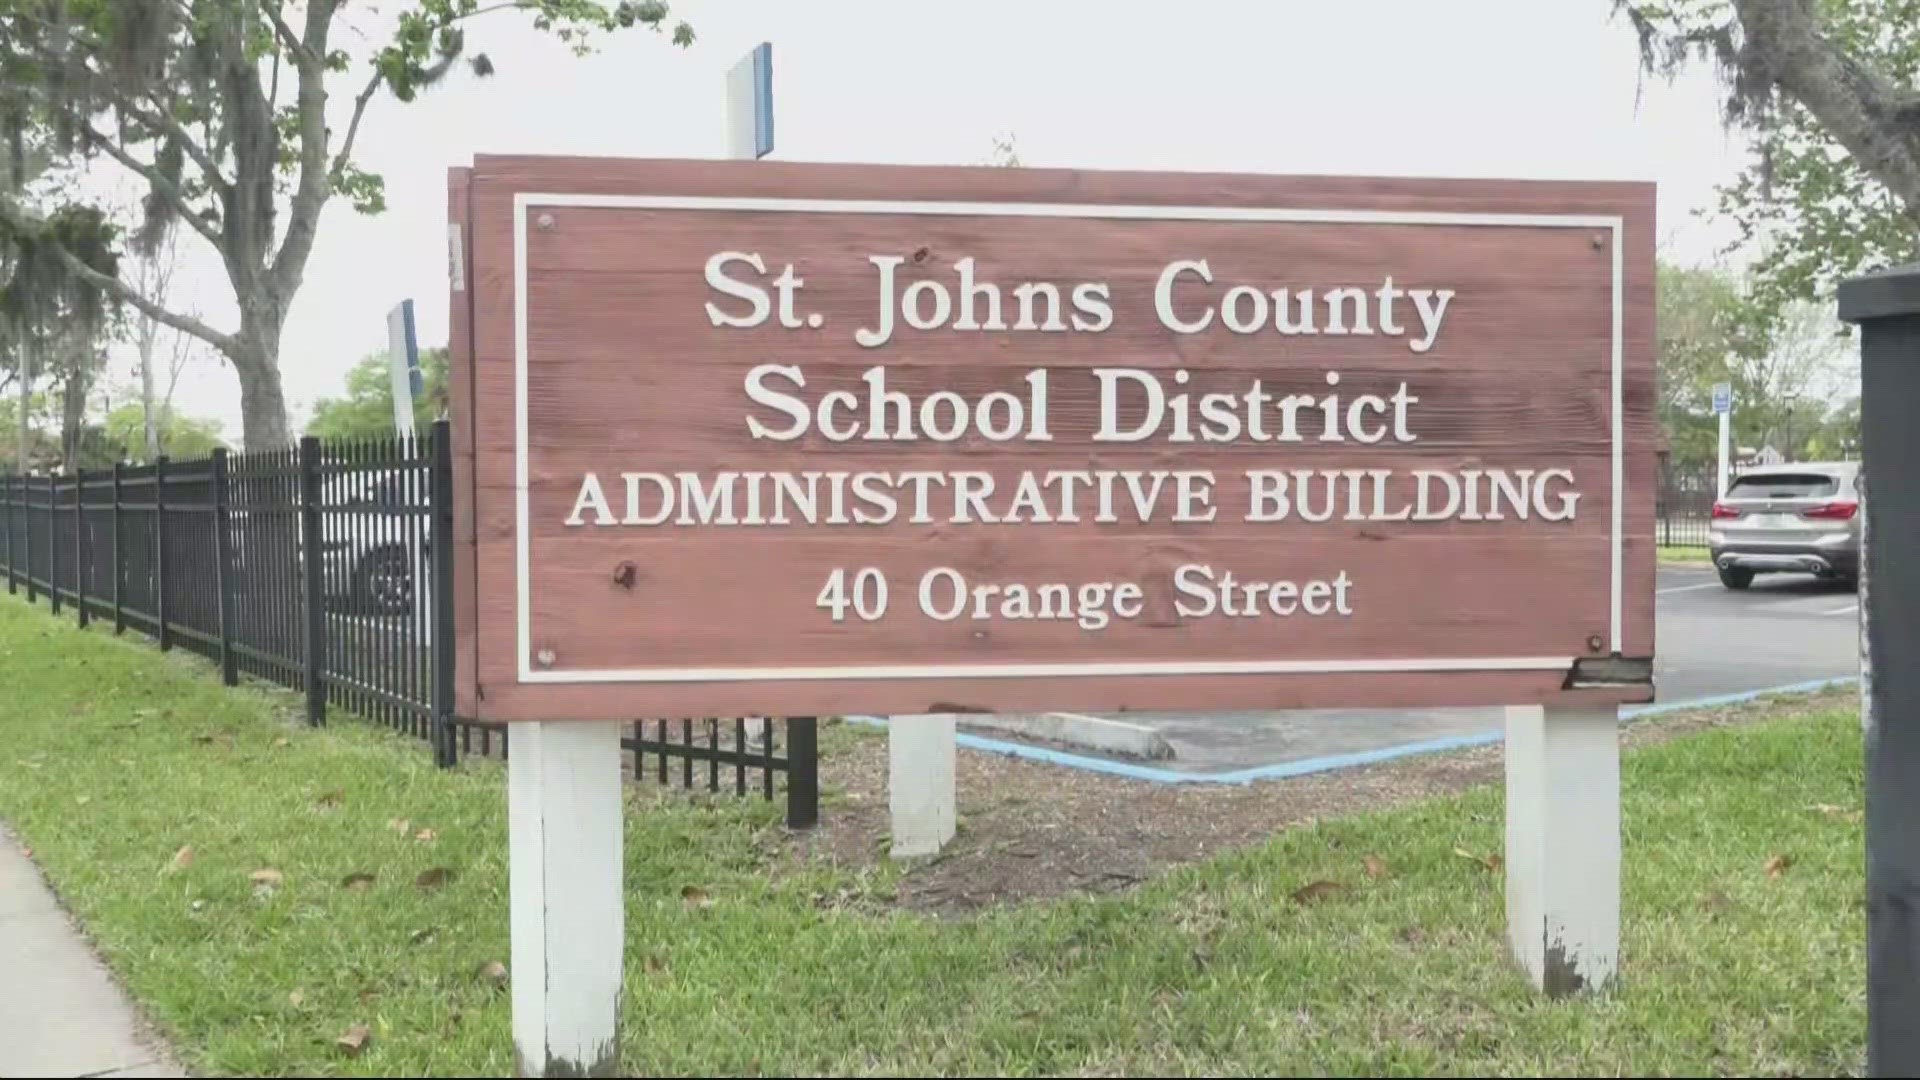 Starting pay for teachers in the St. Johns County school district is $47,500.